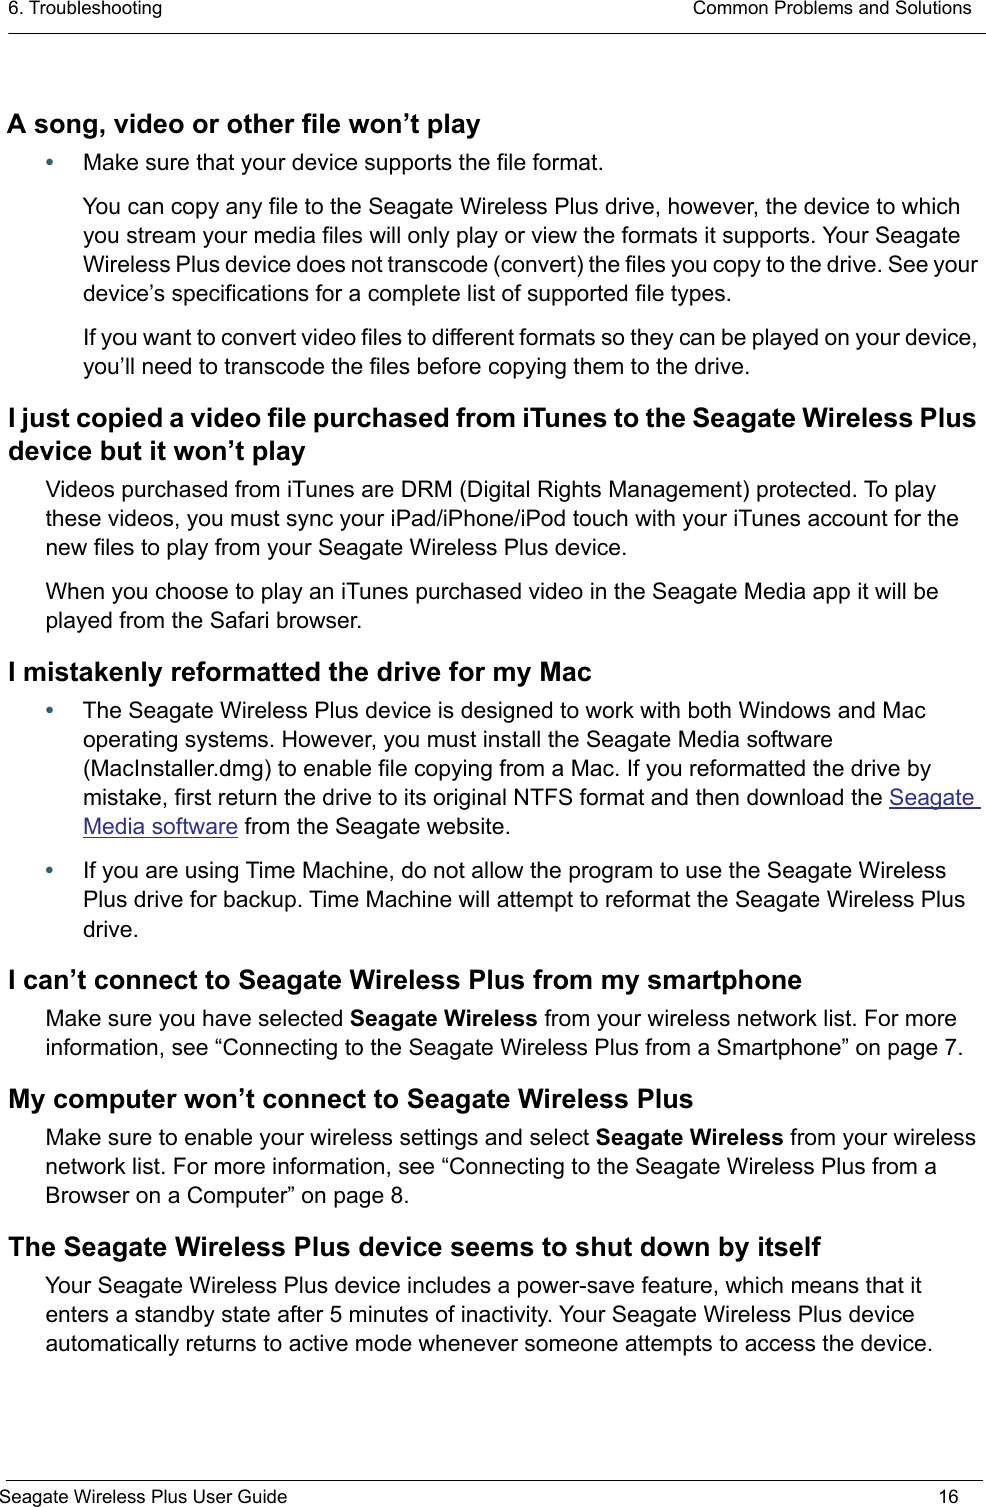 6. Troubleshooting  Common Problems and SolutionsSeagate Wireless Plus User Guide 16A song, video or other file won’t play•Make sure that your device supports the file format.You can copy any file to the Seagate Wireless Plus drive, however, the device to which you stream your media files will only play or view the formats it supports. Your Seagate Wireless Plus device does not transcode (convert) the files you copy to the drive. See your device’s specifications for a complete list of supported file types.If you want to convert video files to different formats so they can be played on your device, you’ll need to transcode the files before copying them to the drive. I just copied a video file purchased from iTunes to the Seagate Wireless Plus device but it won’t playVideos purchased from iTunes are DRM (Digital Rights Management) protected. To play these videos, you must sync your iPad/iPhone/iPod touch with your iTunes account for the new files to play from your Seagate Wireless Plus device.When you choose to play an iTunes purchased video in the Seagate Media app it will be played from the Safari browser.I mistakenly reformatted the drive for my Mac•The Seagate Wireless Plus device is designed to work with both Windows and Mac operating systems. However, you must install the Seagate Media software (MacInstaller.dmg) to enable file copying from a Mac. If you reformatted the drive by mistake, first return the drive to its original NTFS format and then download the Seagate Media software from the Seagate website.•If you are using Time Machine, do not allow the program to use the Seagate Wireless Plus drive for backup. Time Machine will attempt to reformat the Seagate Wireless Plus drive.I can’t connect to Seagate Wireless Plus from my smartphoneMake sure you have selected Seagate Wireless from your wireless network list. For more information, see “Connecting to the Seagate Wireless Plus from a Smartphone” on page 7.My computer won’t connect to Seagate Wireless PlusMake sure to enable your wireless settings and select Seagate Wireless from your wireless network list. For more information, see “Connecting to the Seagate Wireless Plus from a Browser on a Computer” on page 8.The Seagate Wireless Plus device seems to shut down by itselfYour Seagate Wireless Plus device includes a power-save feature, which means that it enters a standby state after 5 minutes of inactivity. Your Seagate Wireless Plus device automatically returns to active mode whenever someone attempts to access the device.